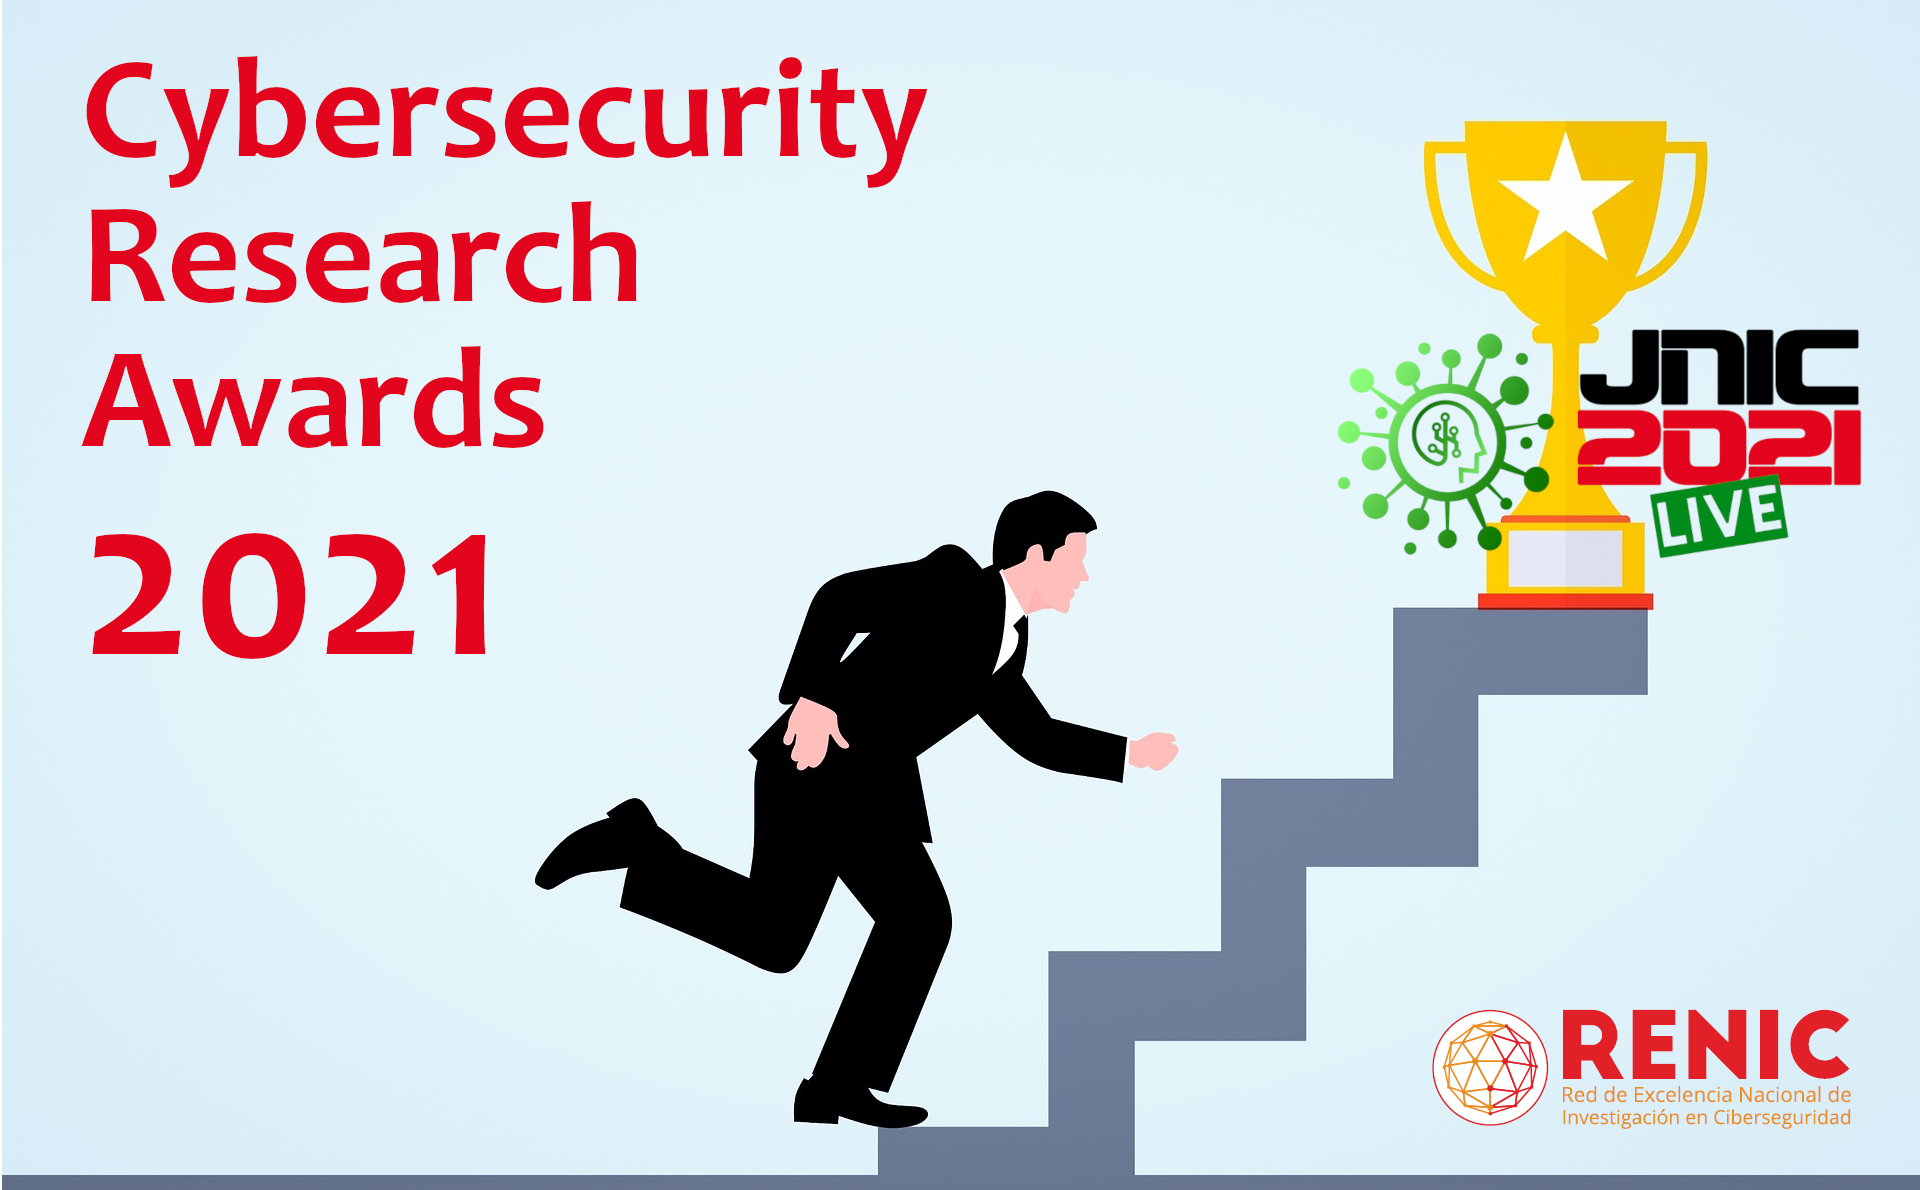 Cybersecurity Research Awards 2021 convened